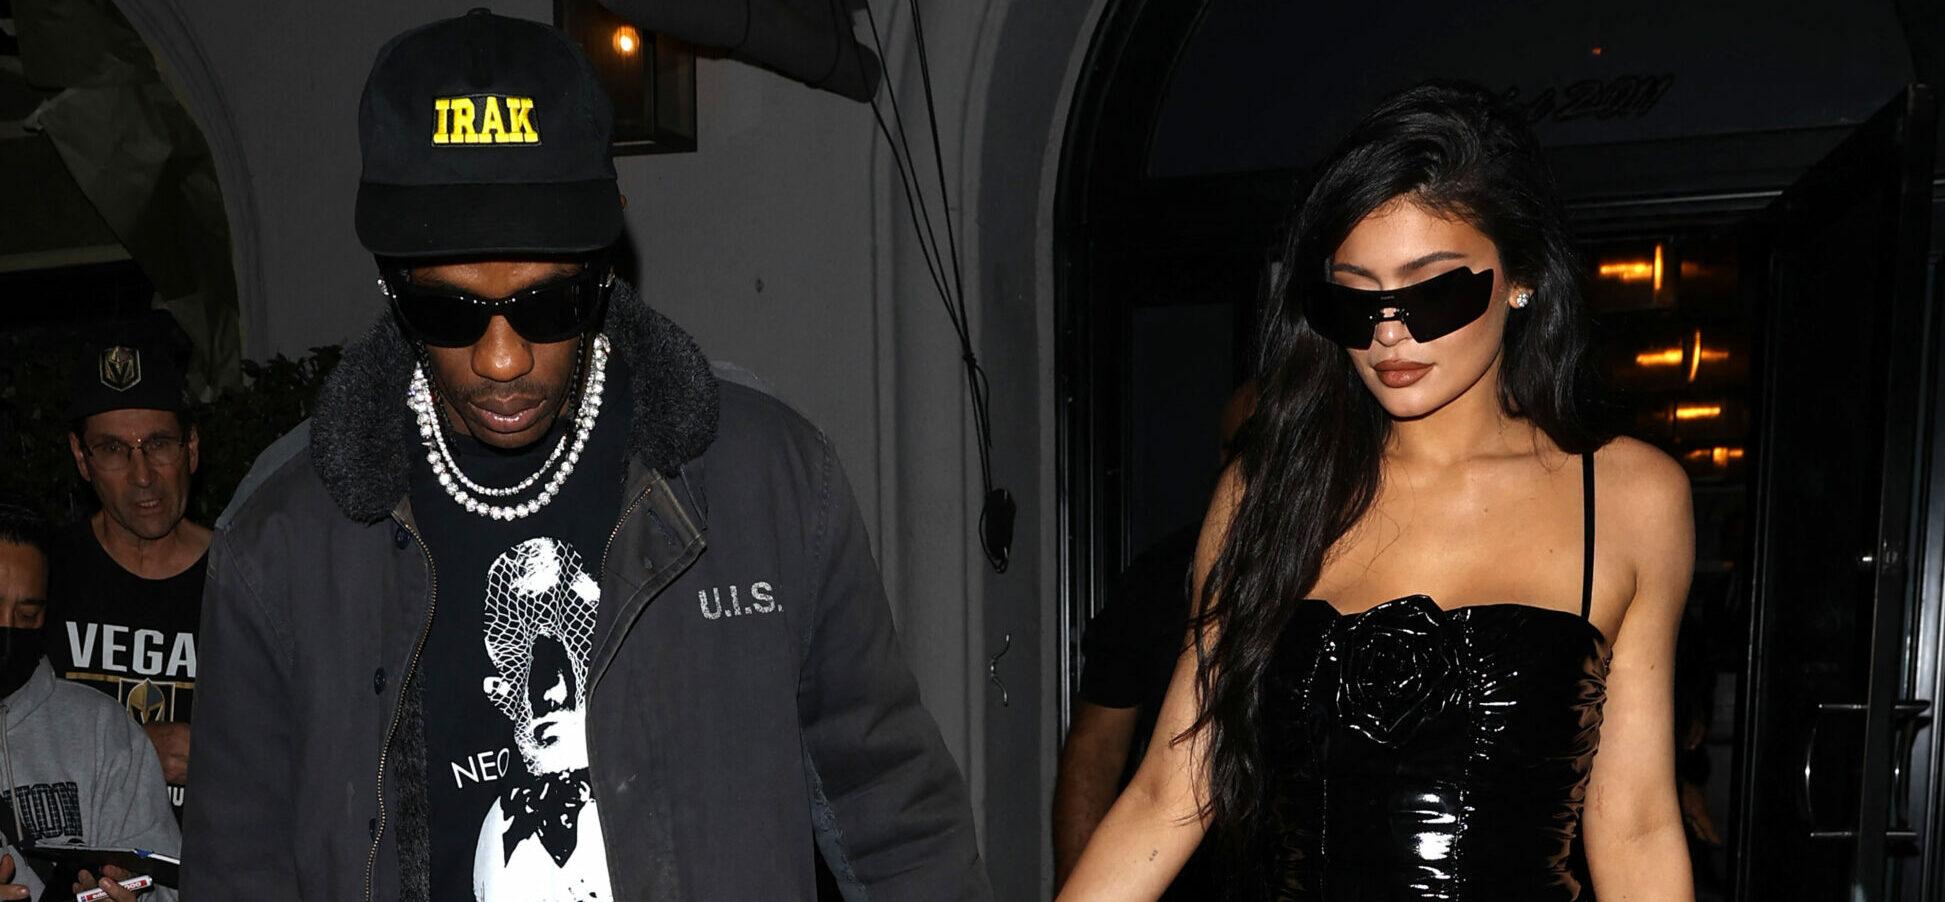 Kylie Jenner and Travis Scott hand-In-Hand leave dinner at Craigs in West Hollywood CA